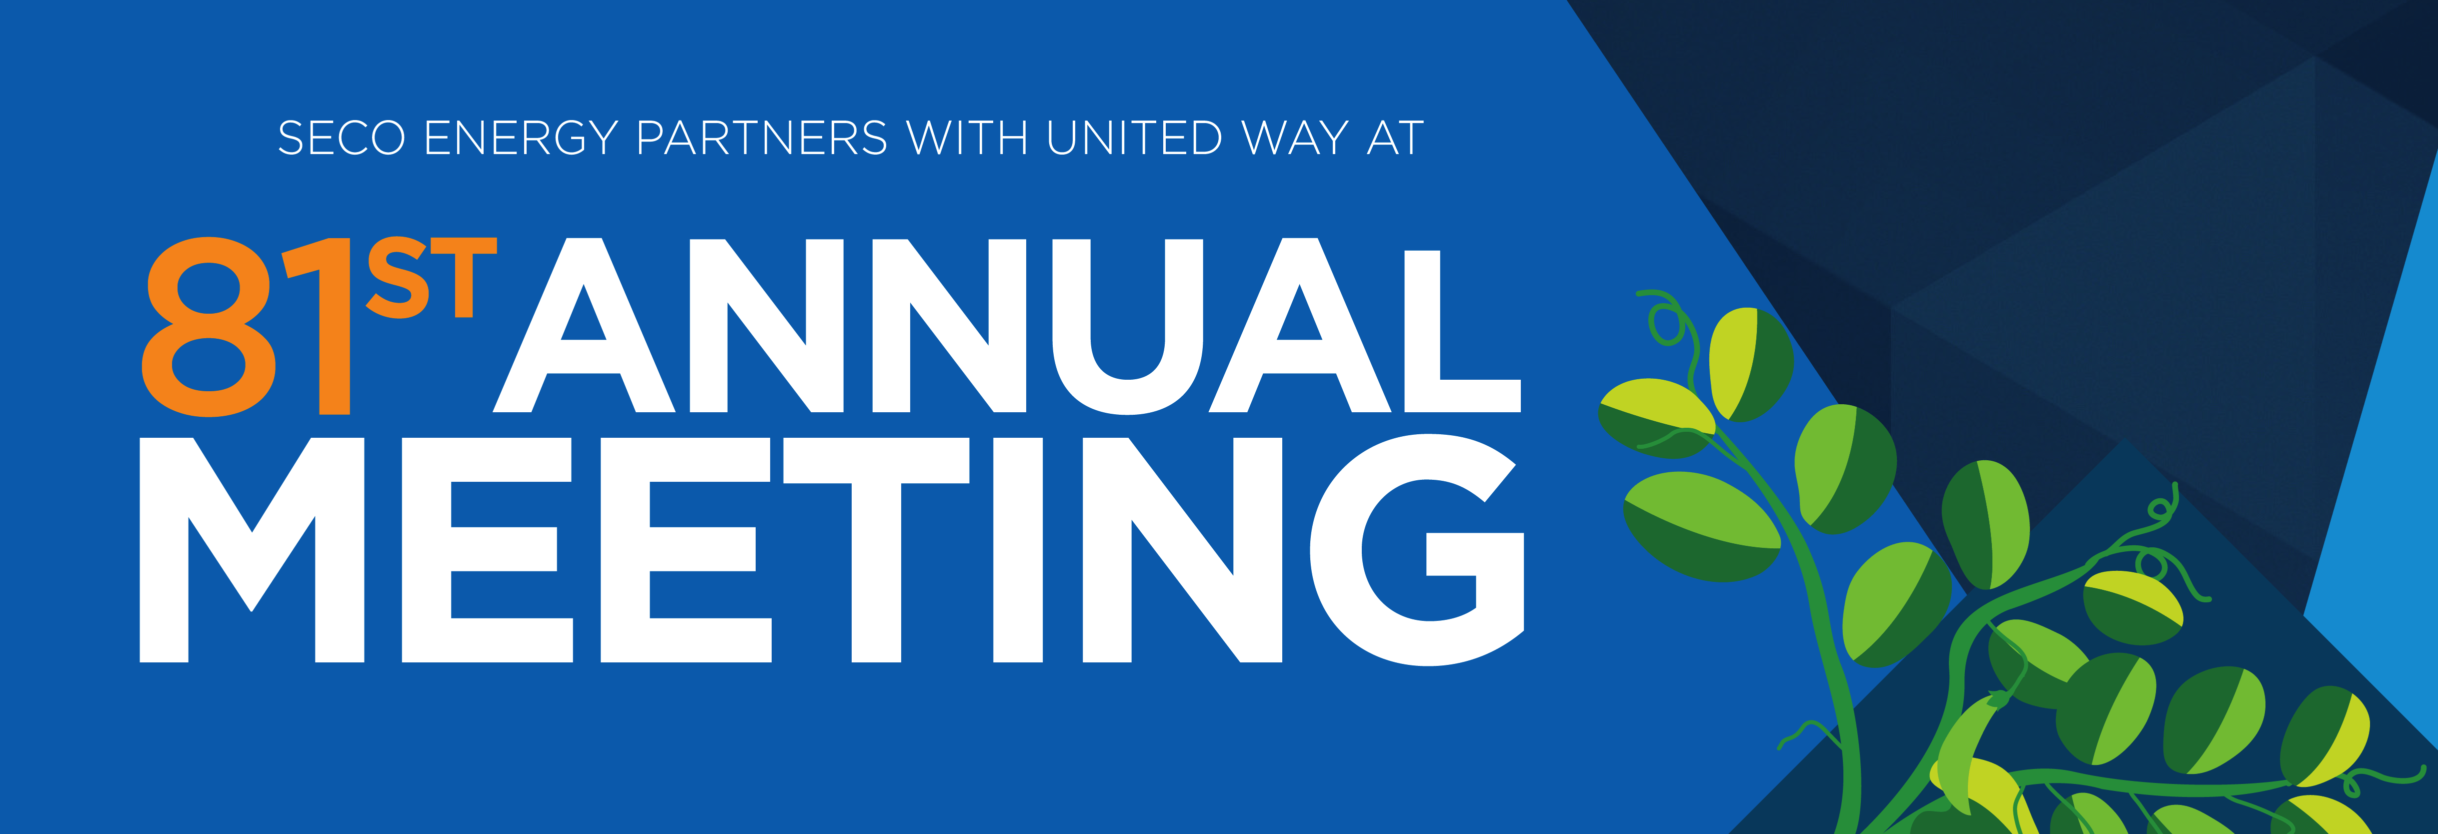 SECO Energy Partners with United Way at 81st Annual Meeting